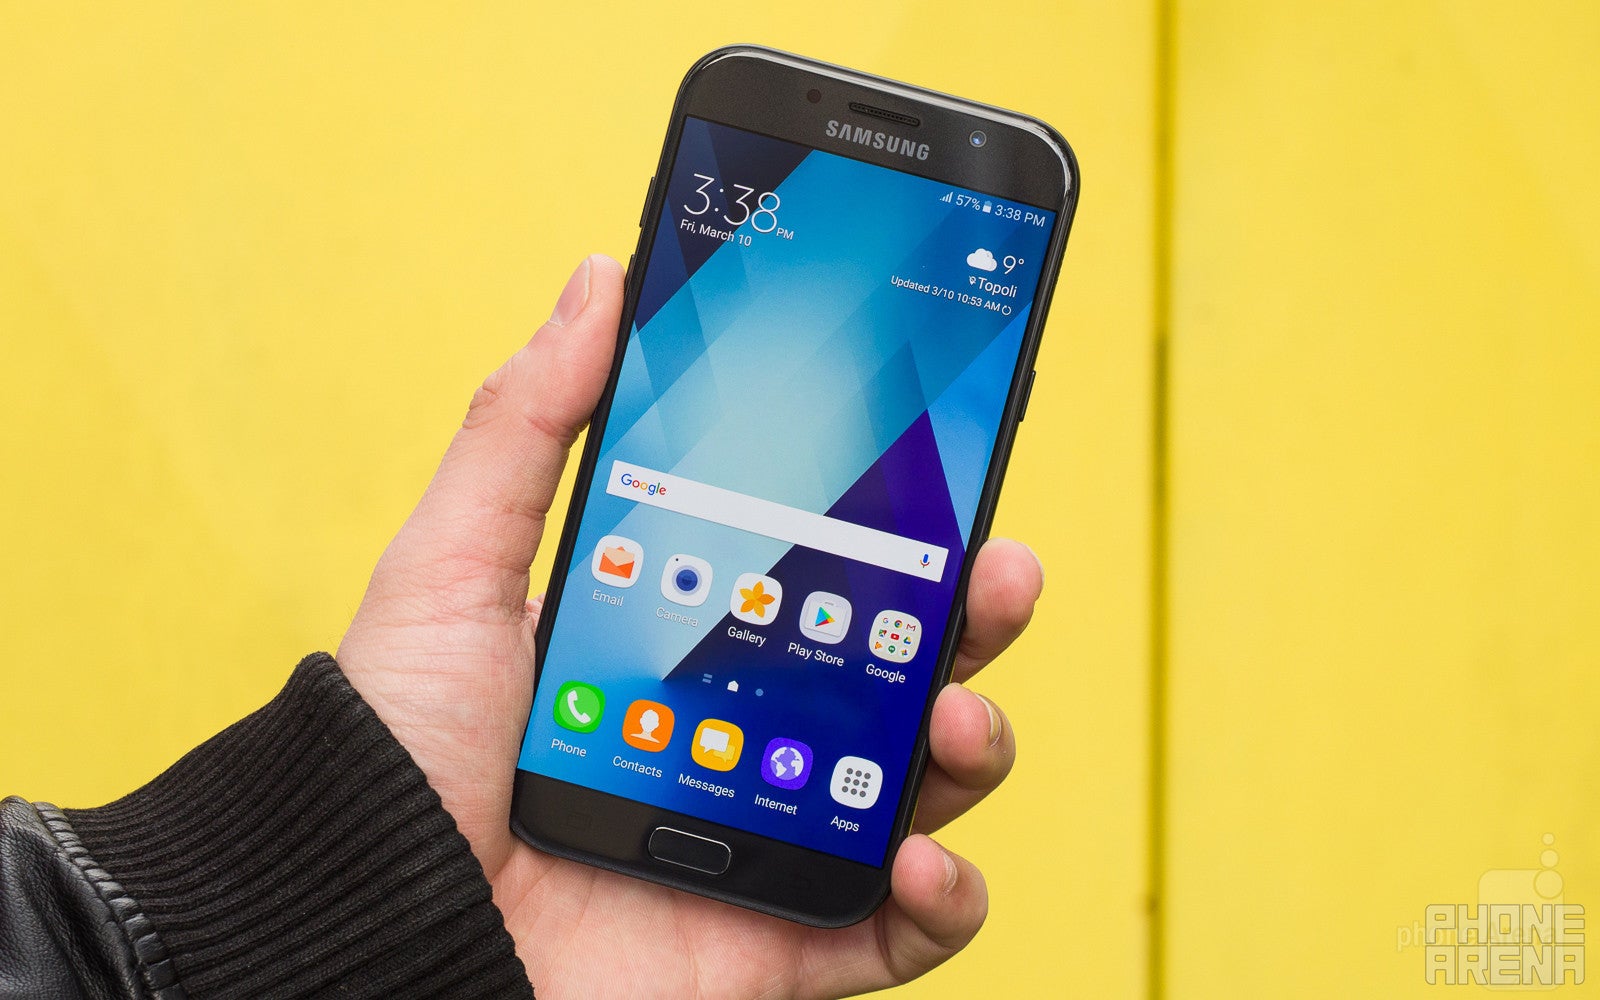 The Samsung Galaxy A7 (2017), which most definitely does not feature an Infinity Display - The Samsung Galaxy A series may get Infinity Displays starting next year